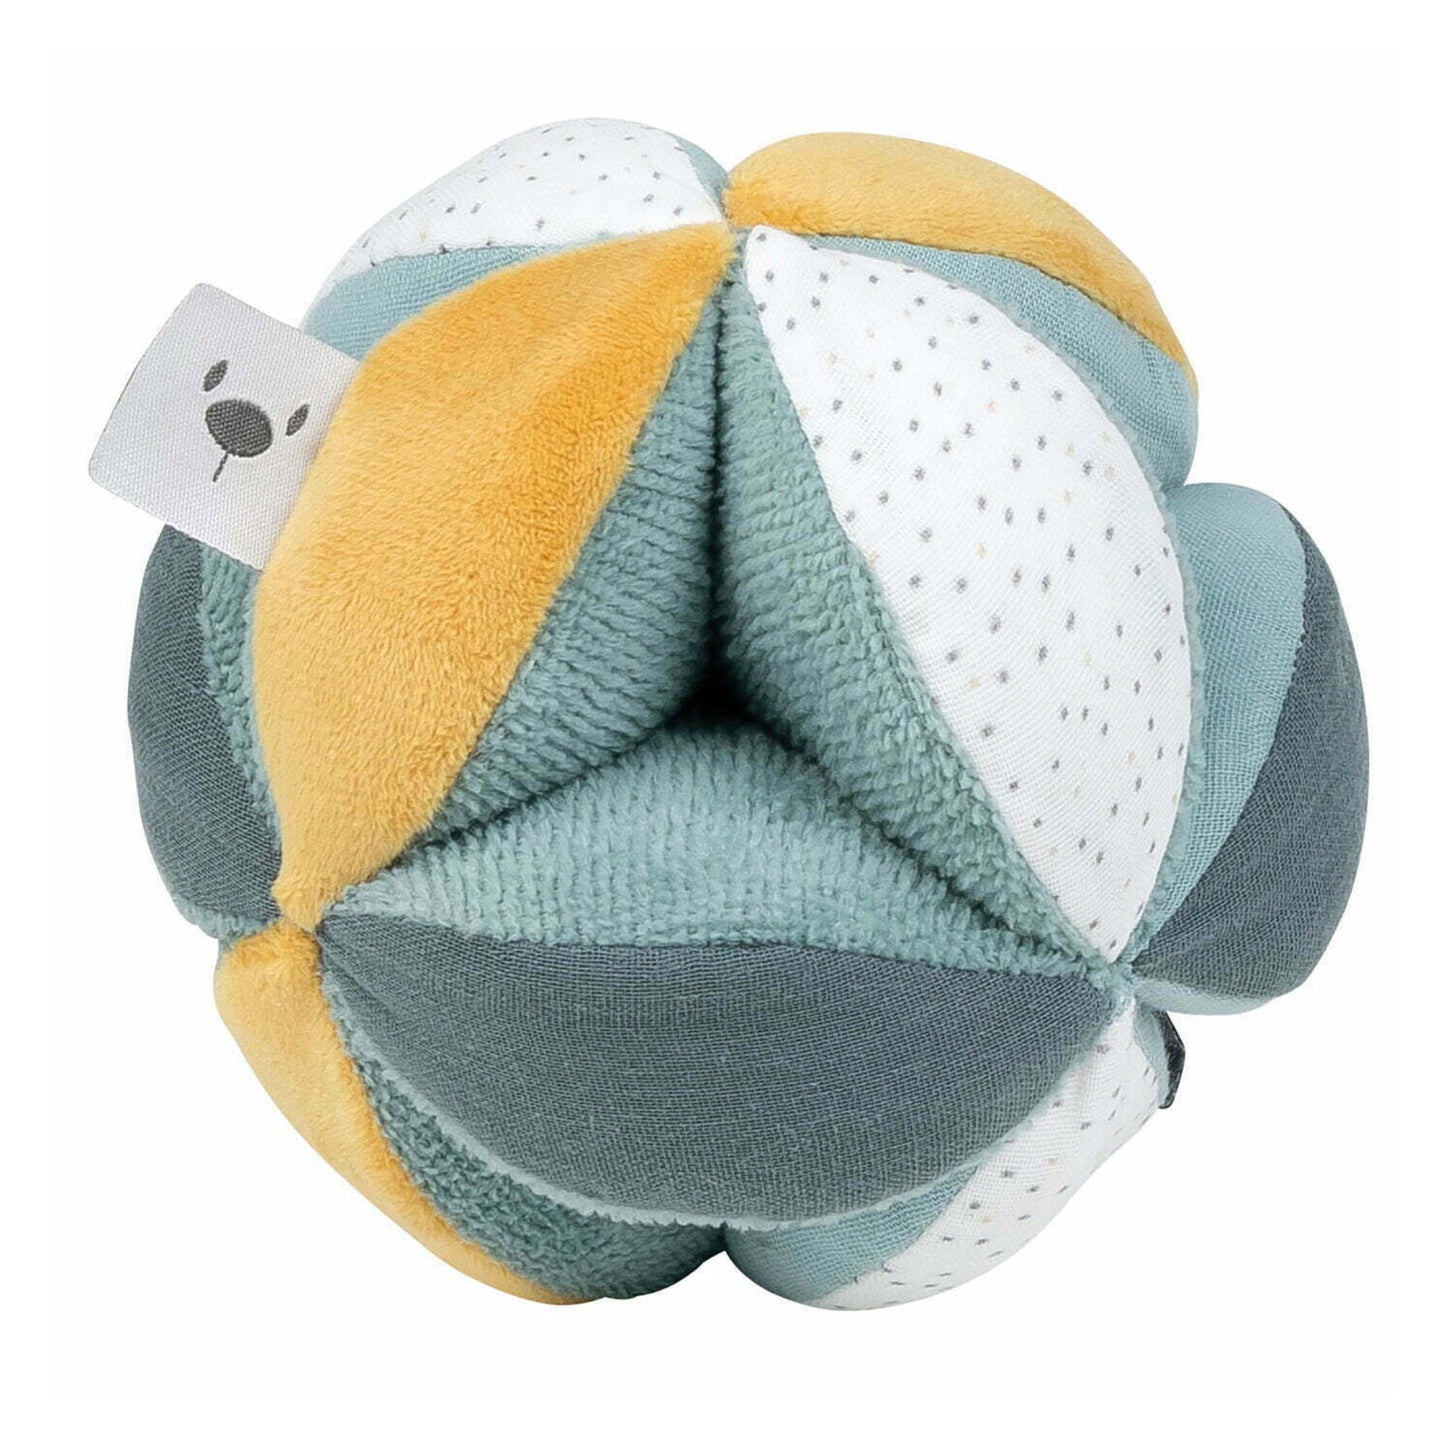 This beautifully simple cuddly toy comes with four activities, rattling, squeaking, paper crunching and lots of different grasping angles. The plush, super soft material makes for the perfect first toy for baby that will be cherished for years to come.